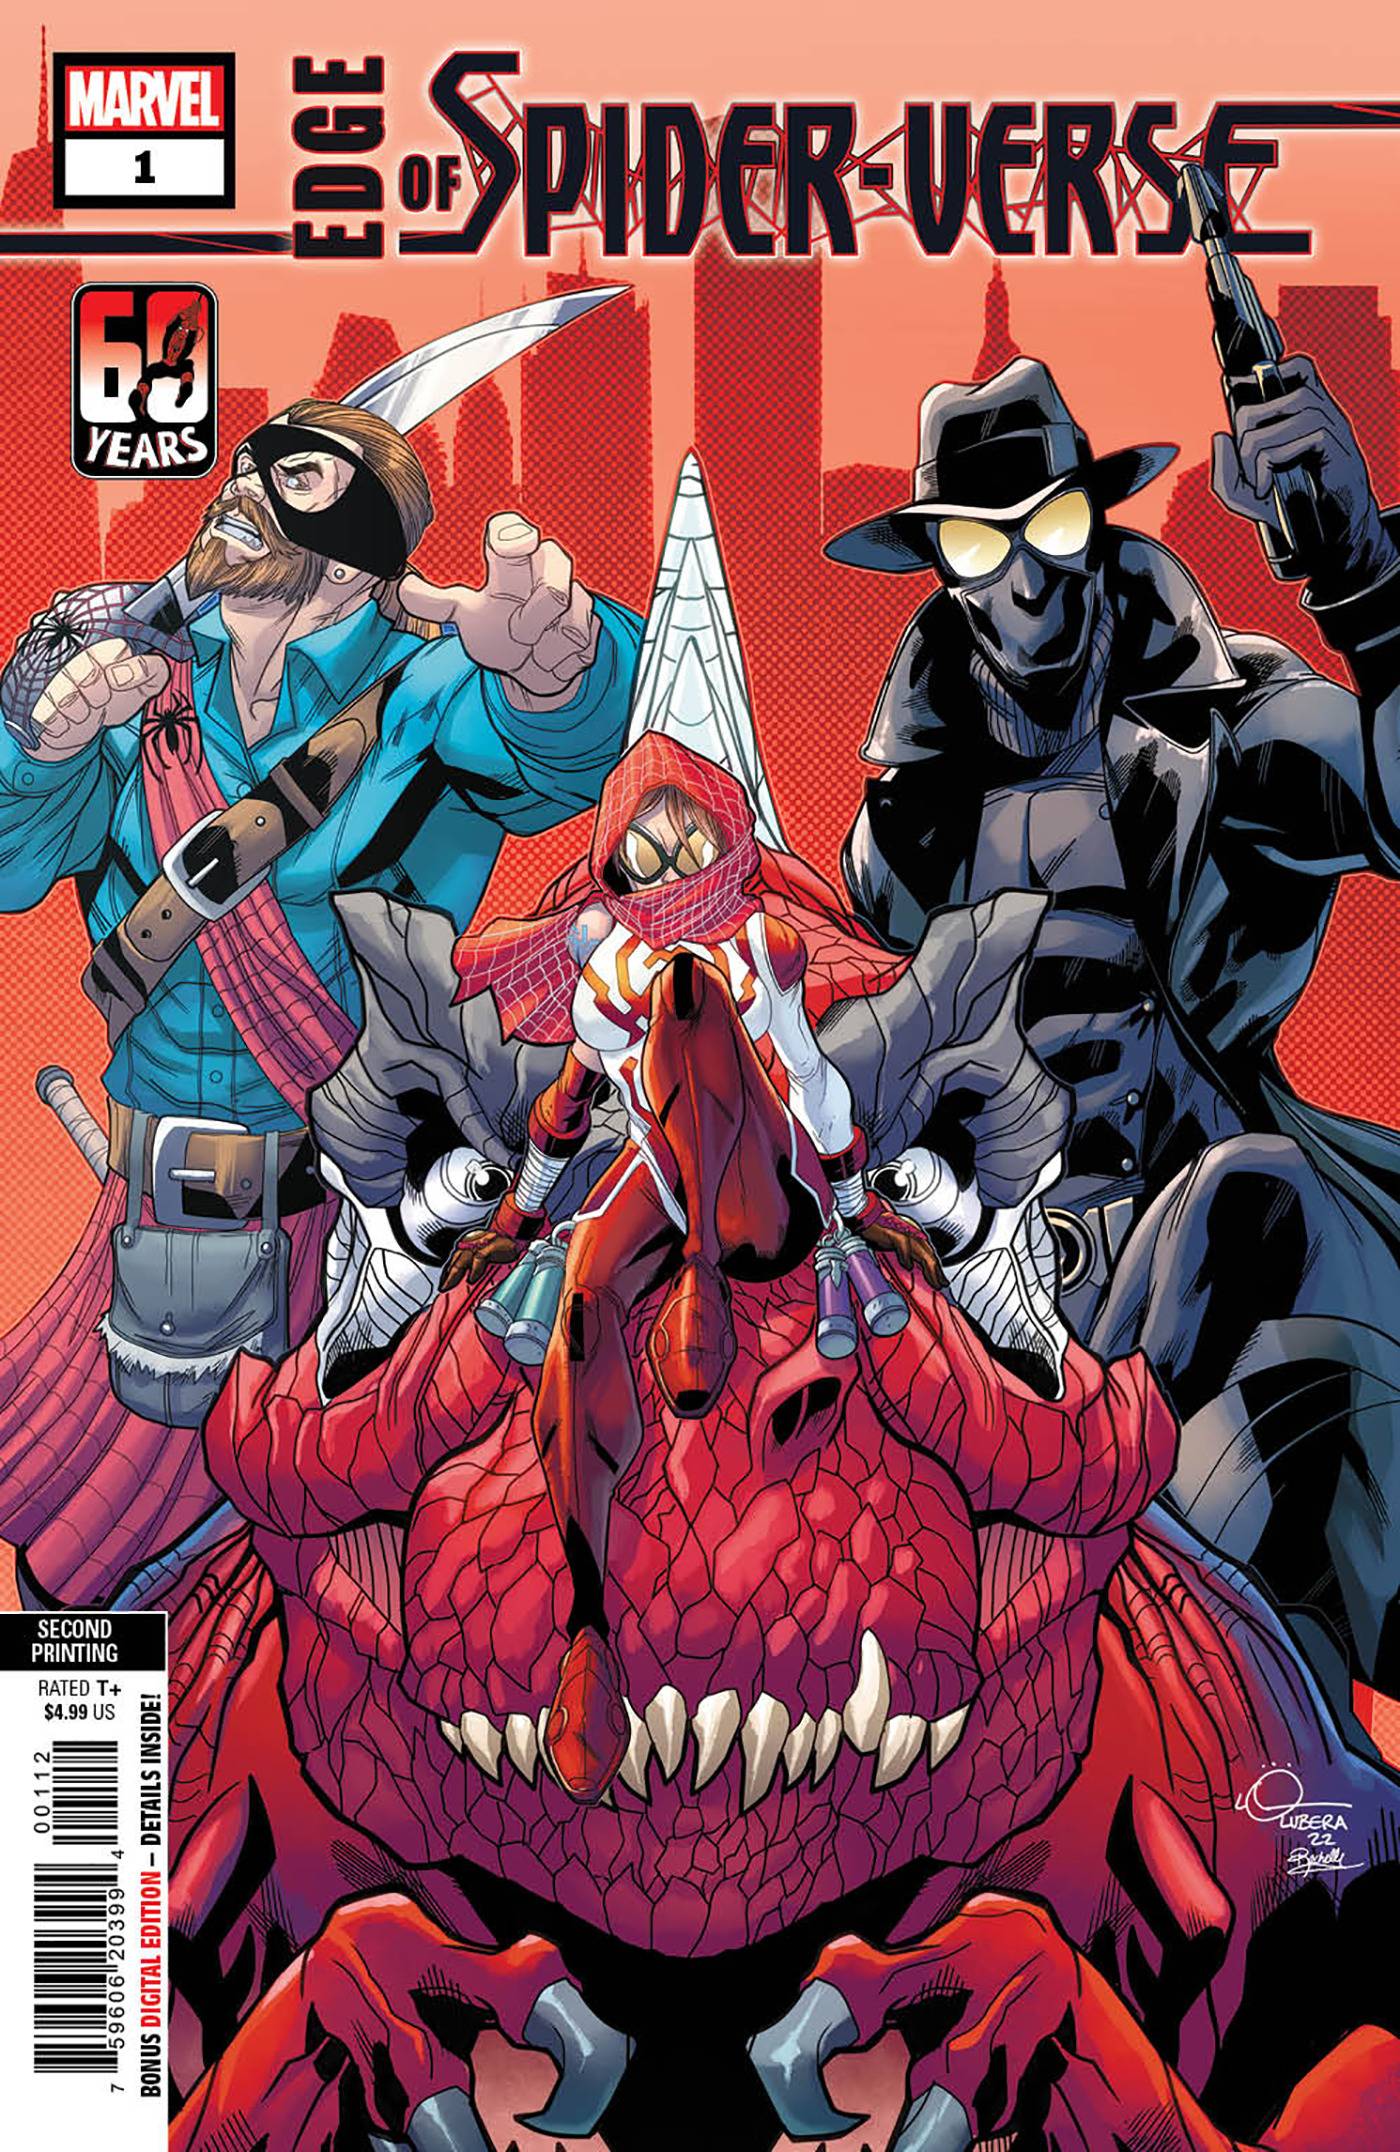 09/14/2022 EDGE OF SPIDER-VERSE #1 (OF 5) 2ND PTG LUBERA VARIANT